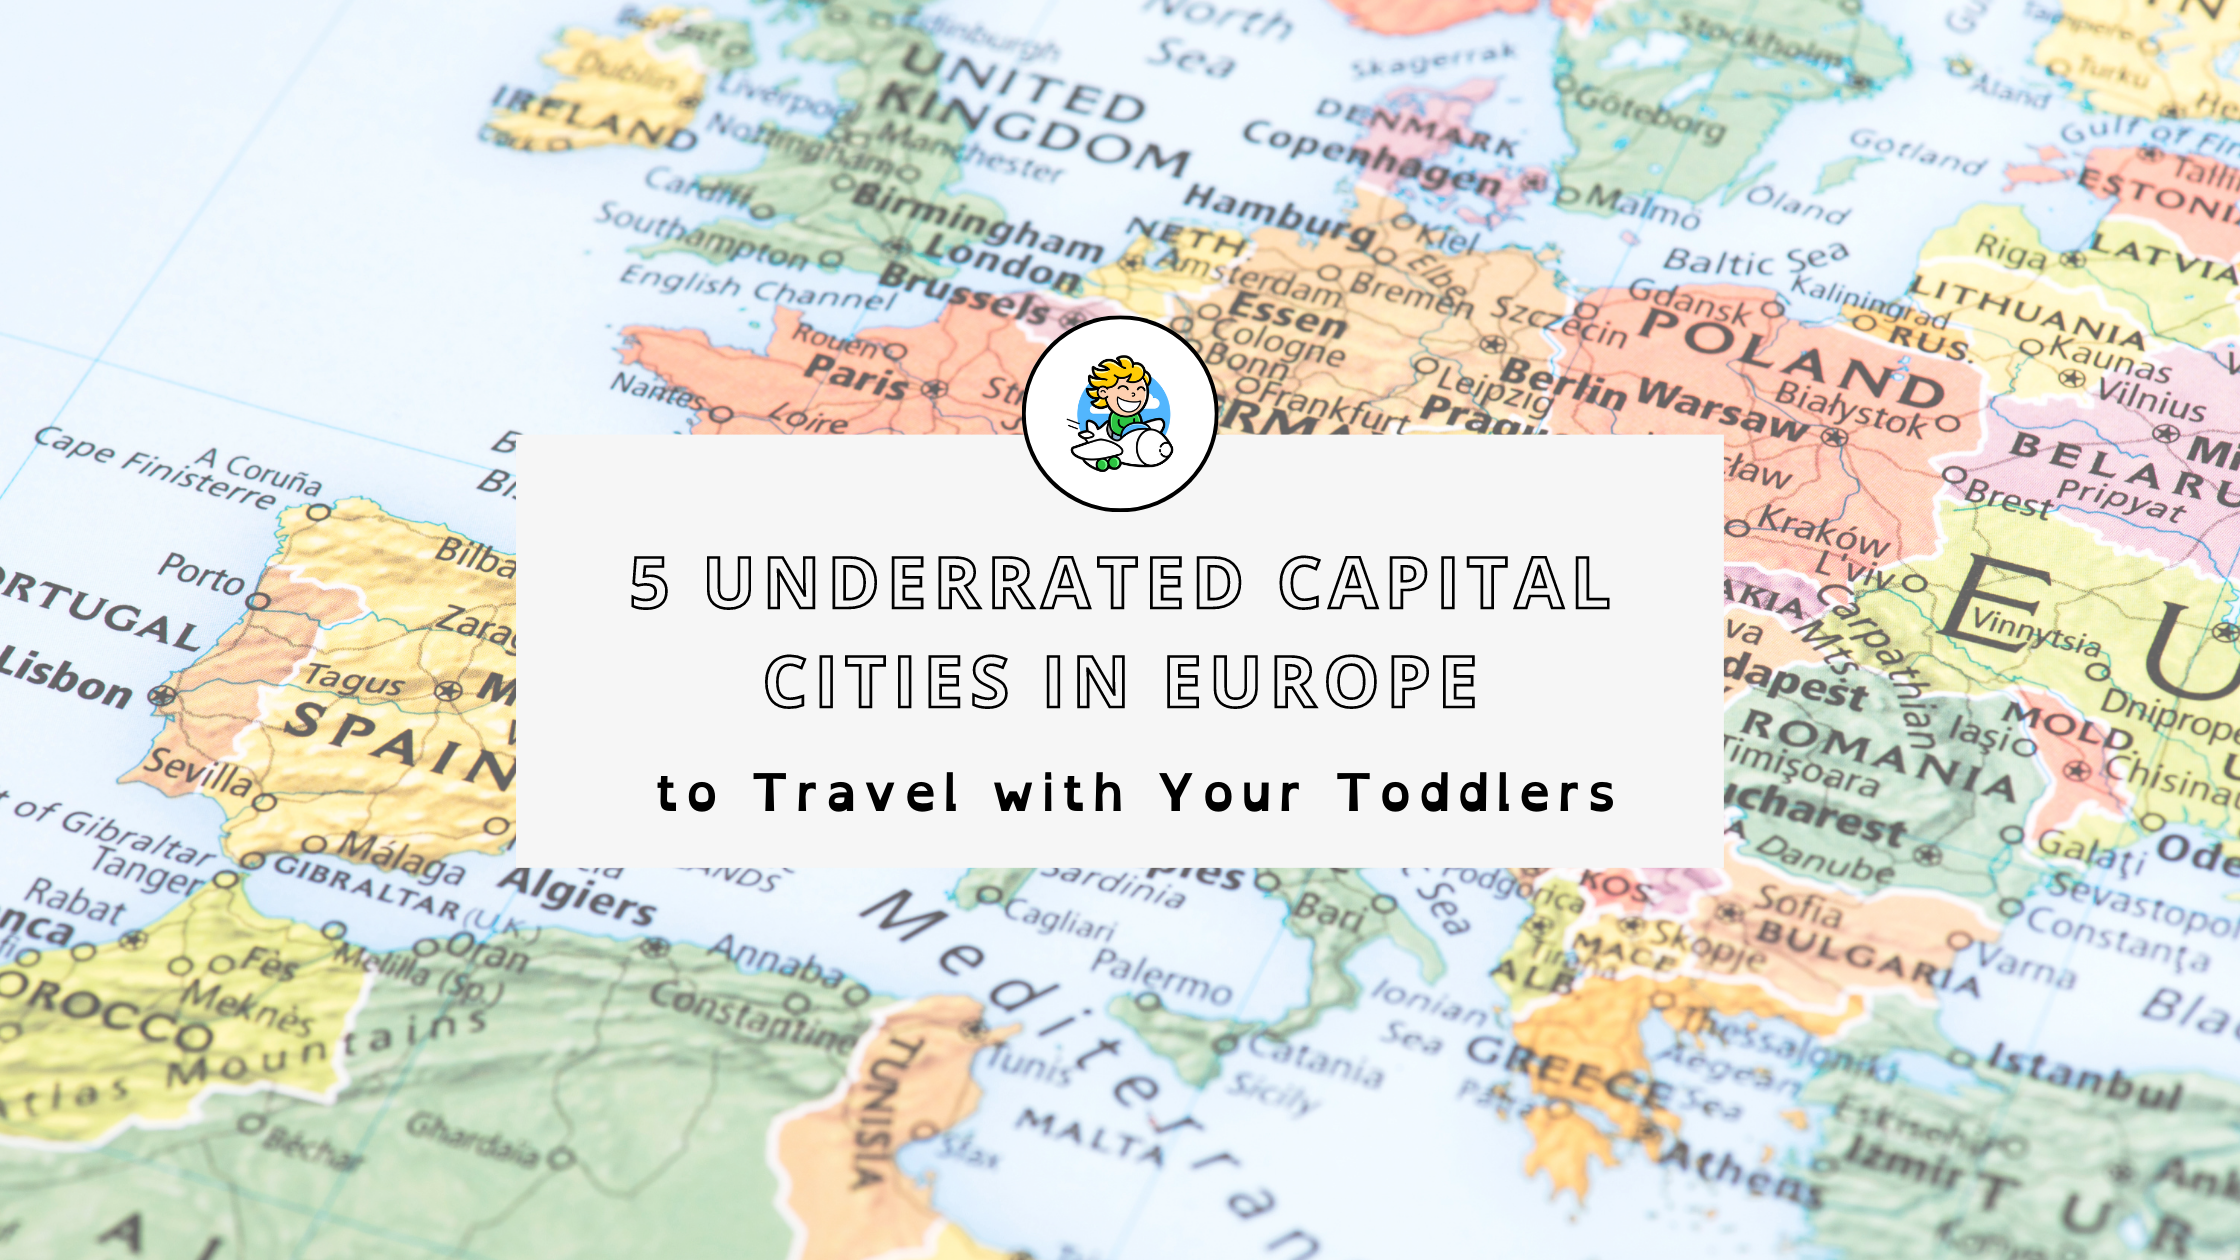 5 Underrated Capital Cities in Europe to Travel with Your Toddlers